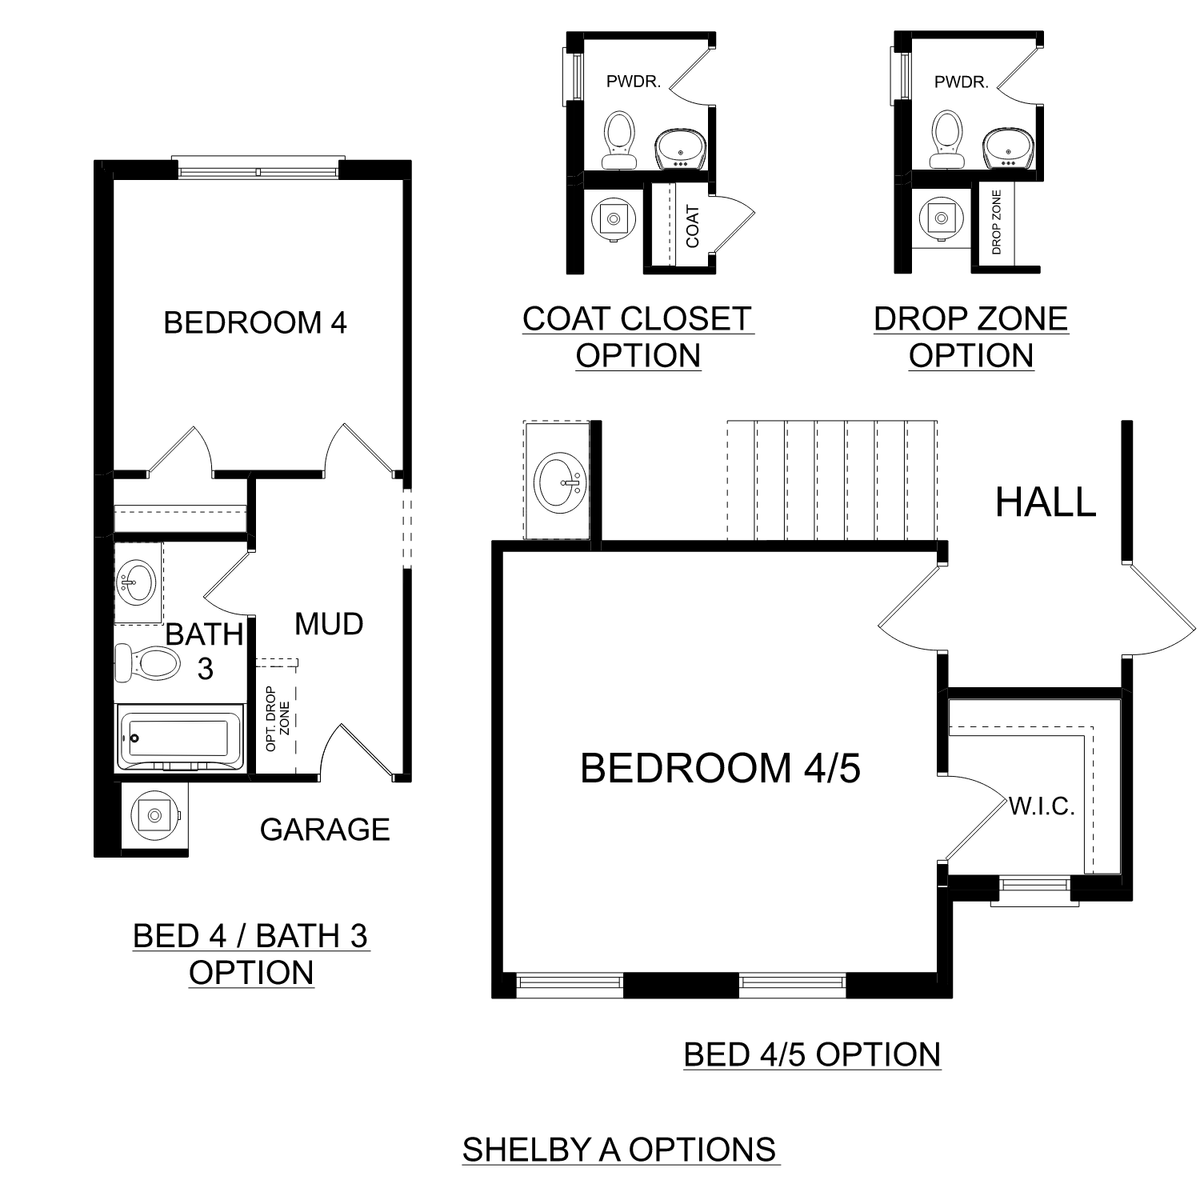 3 - The Shelby A buildable floor plan layout in Davidson Homes' Cain Park community.